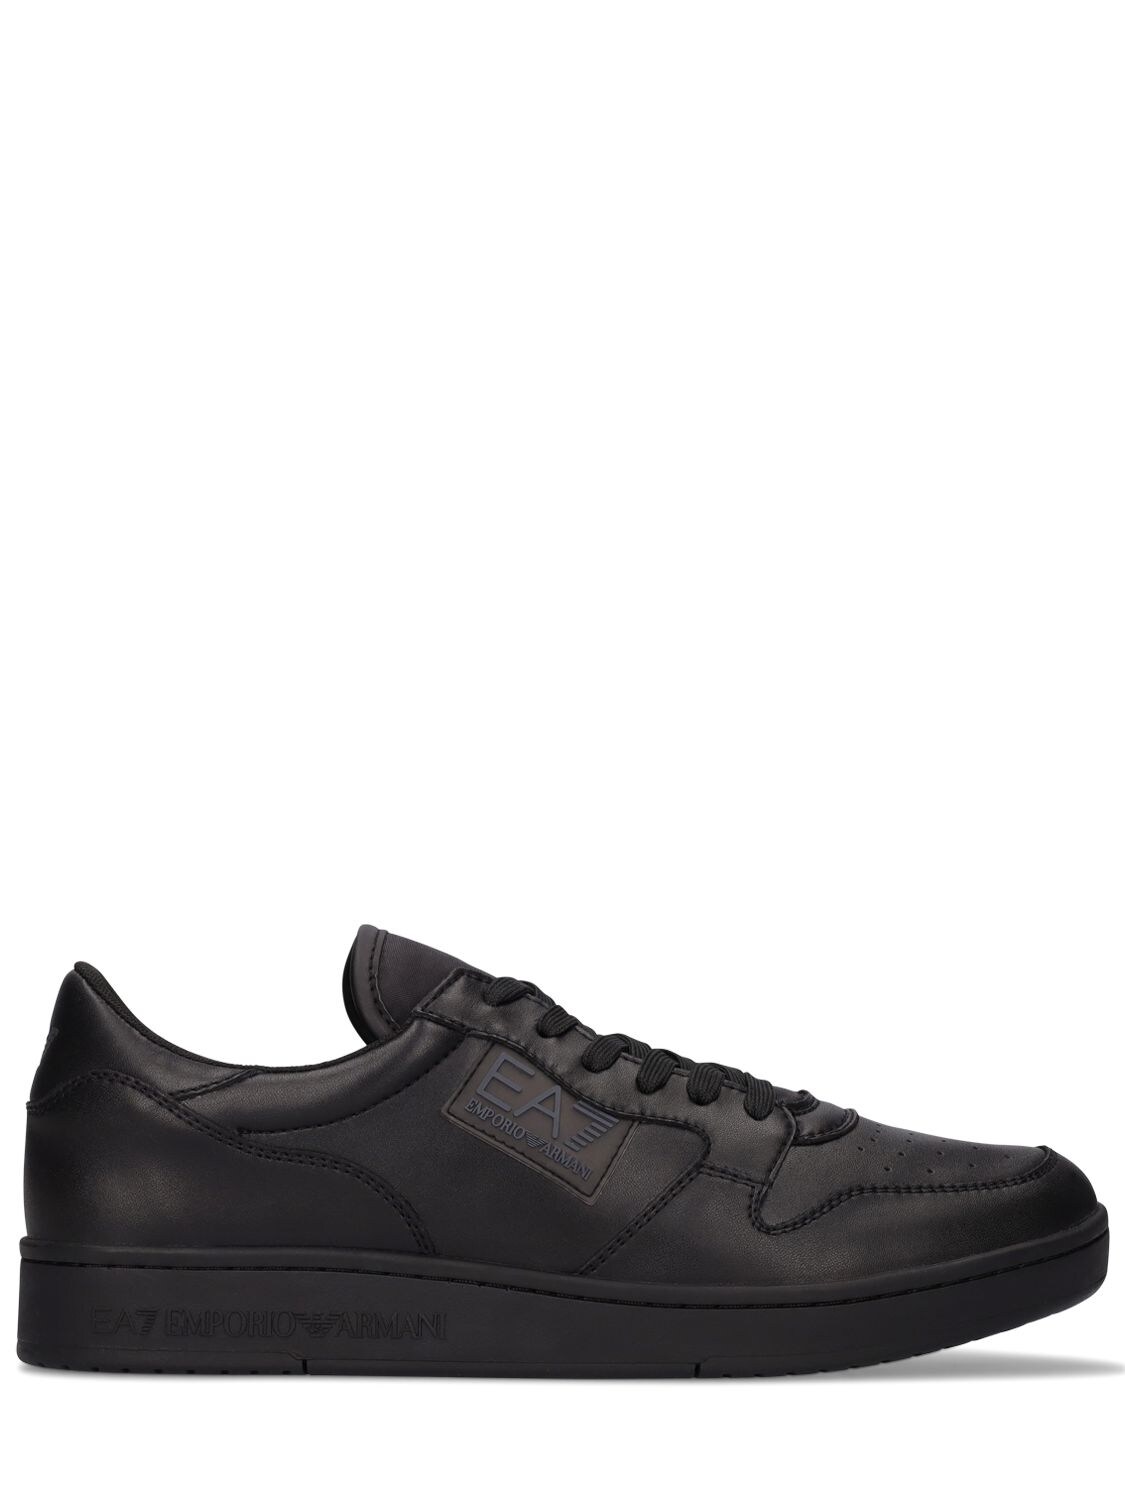 EA7 NEW MILLENNIUM LEATHER trainers